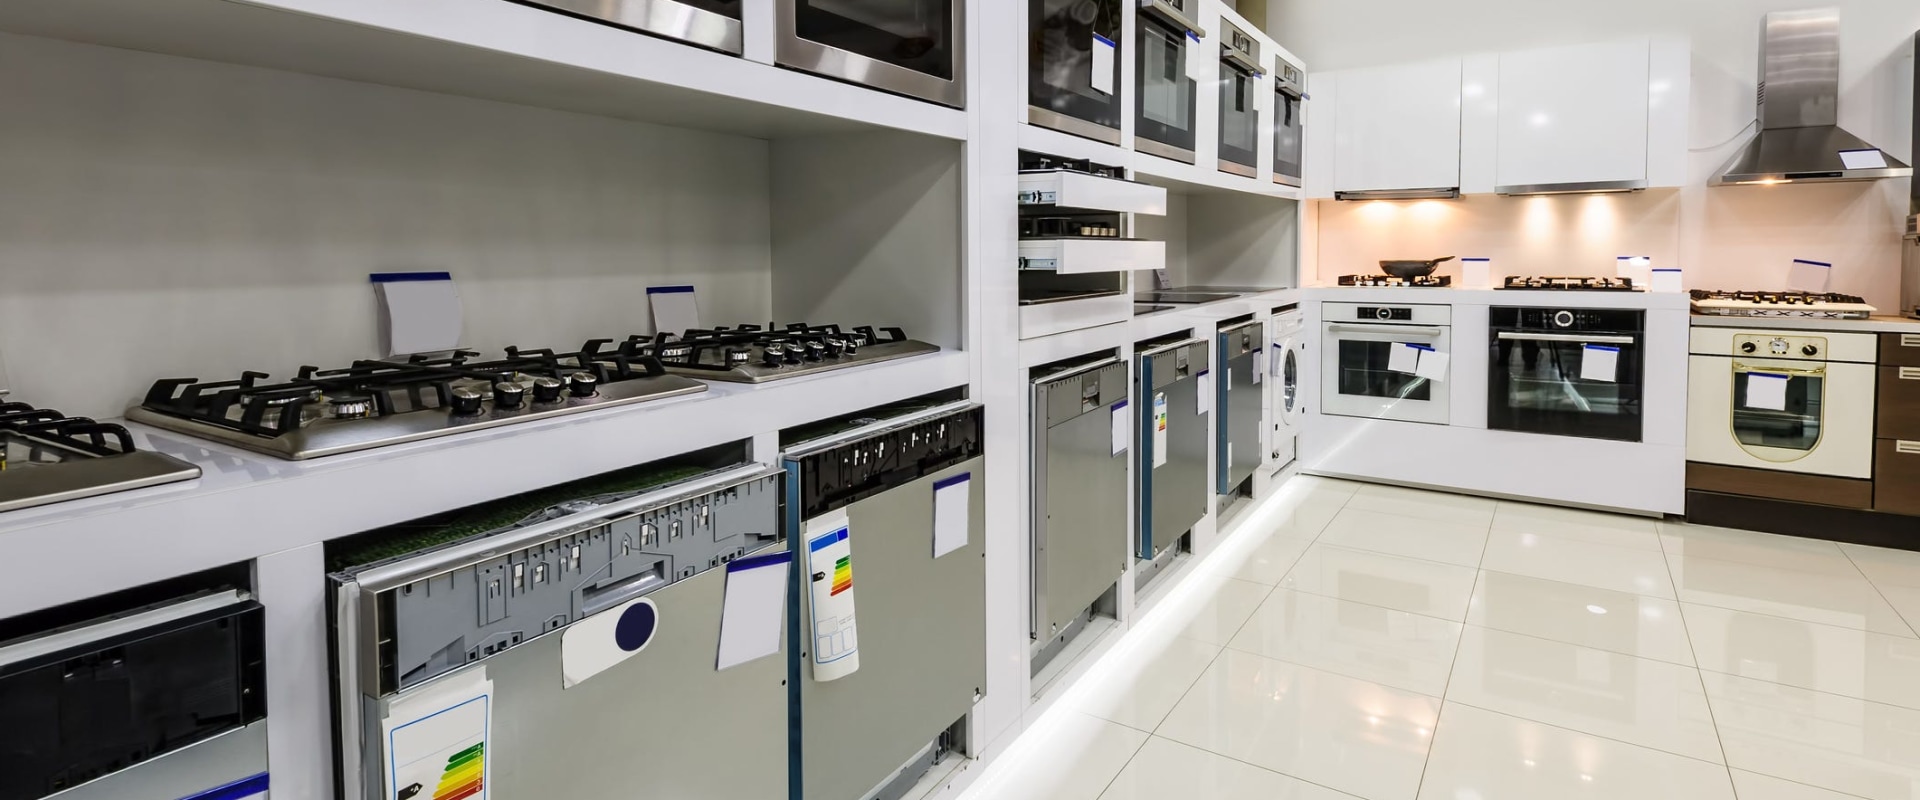 Which retailer sells the most appliances?